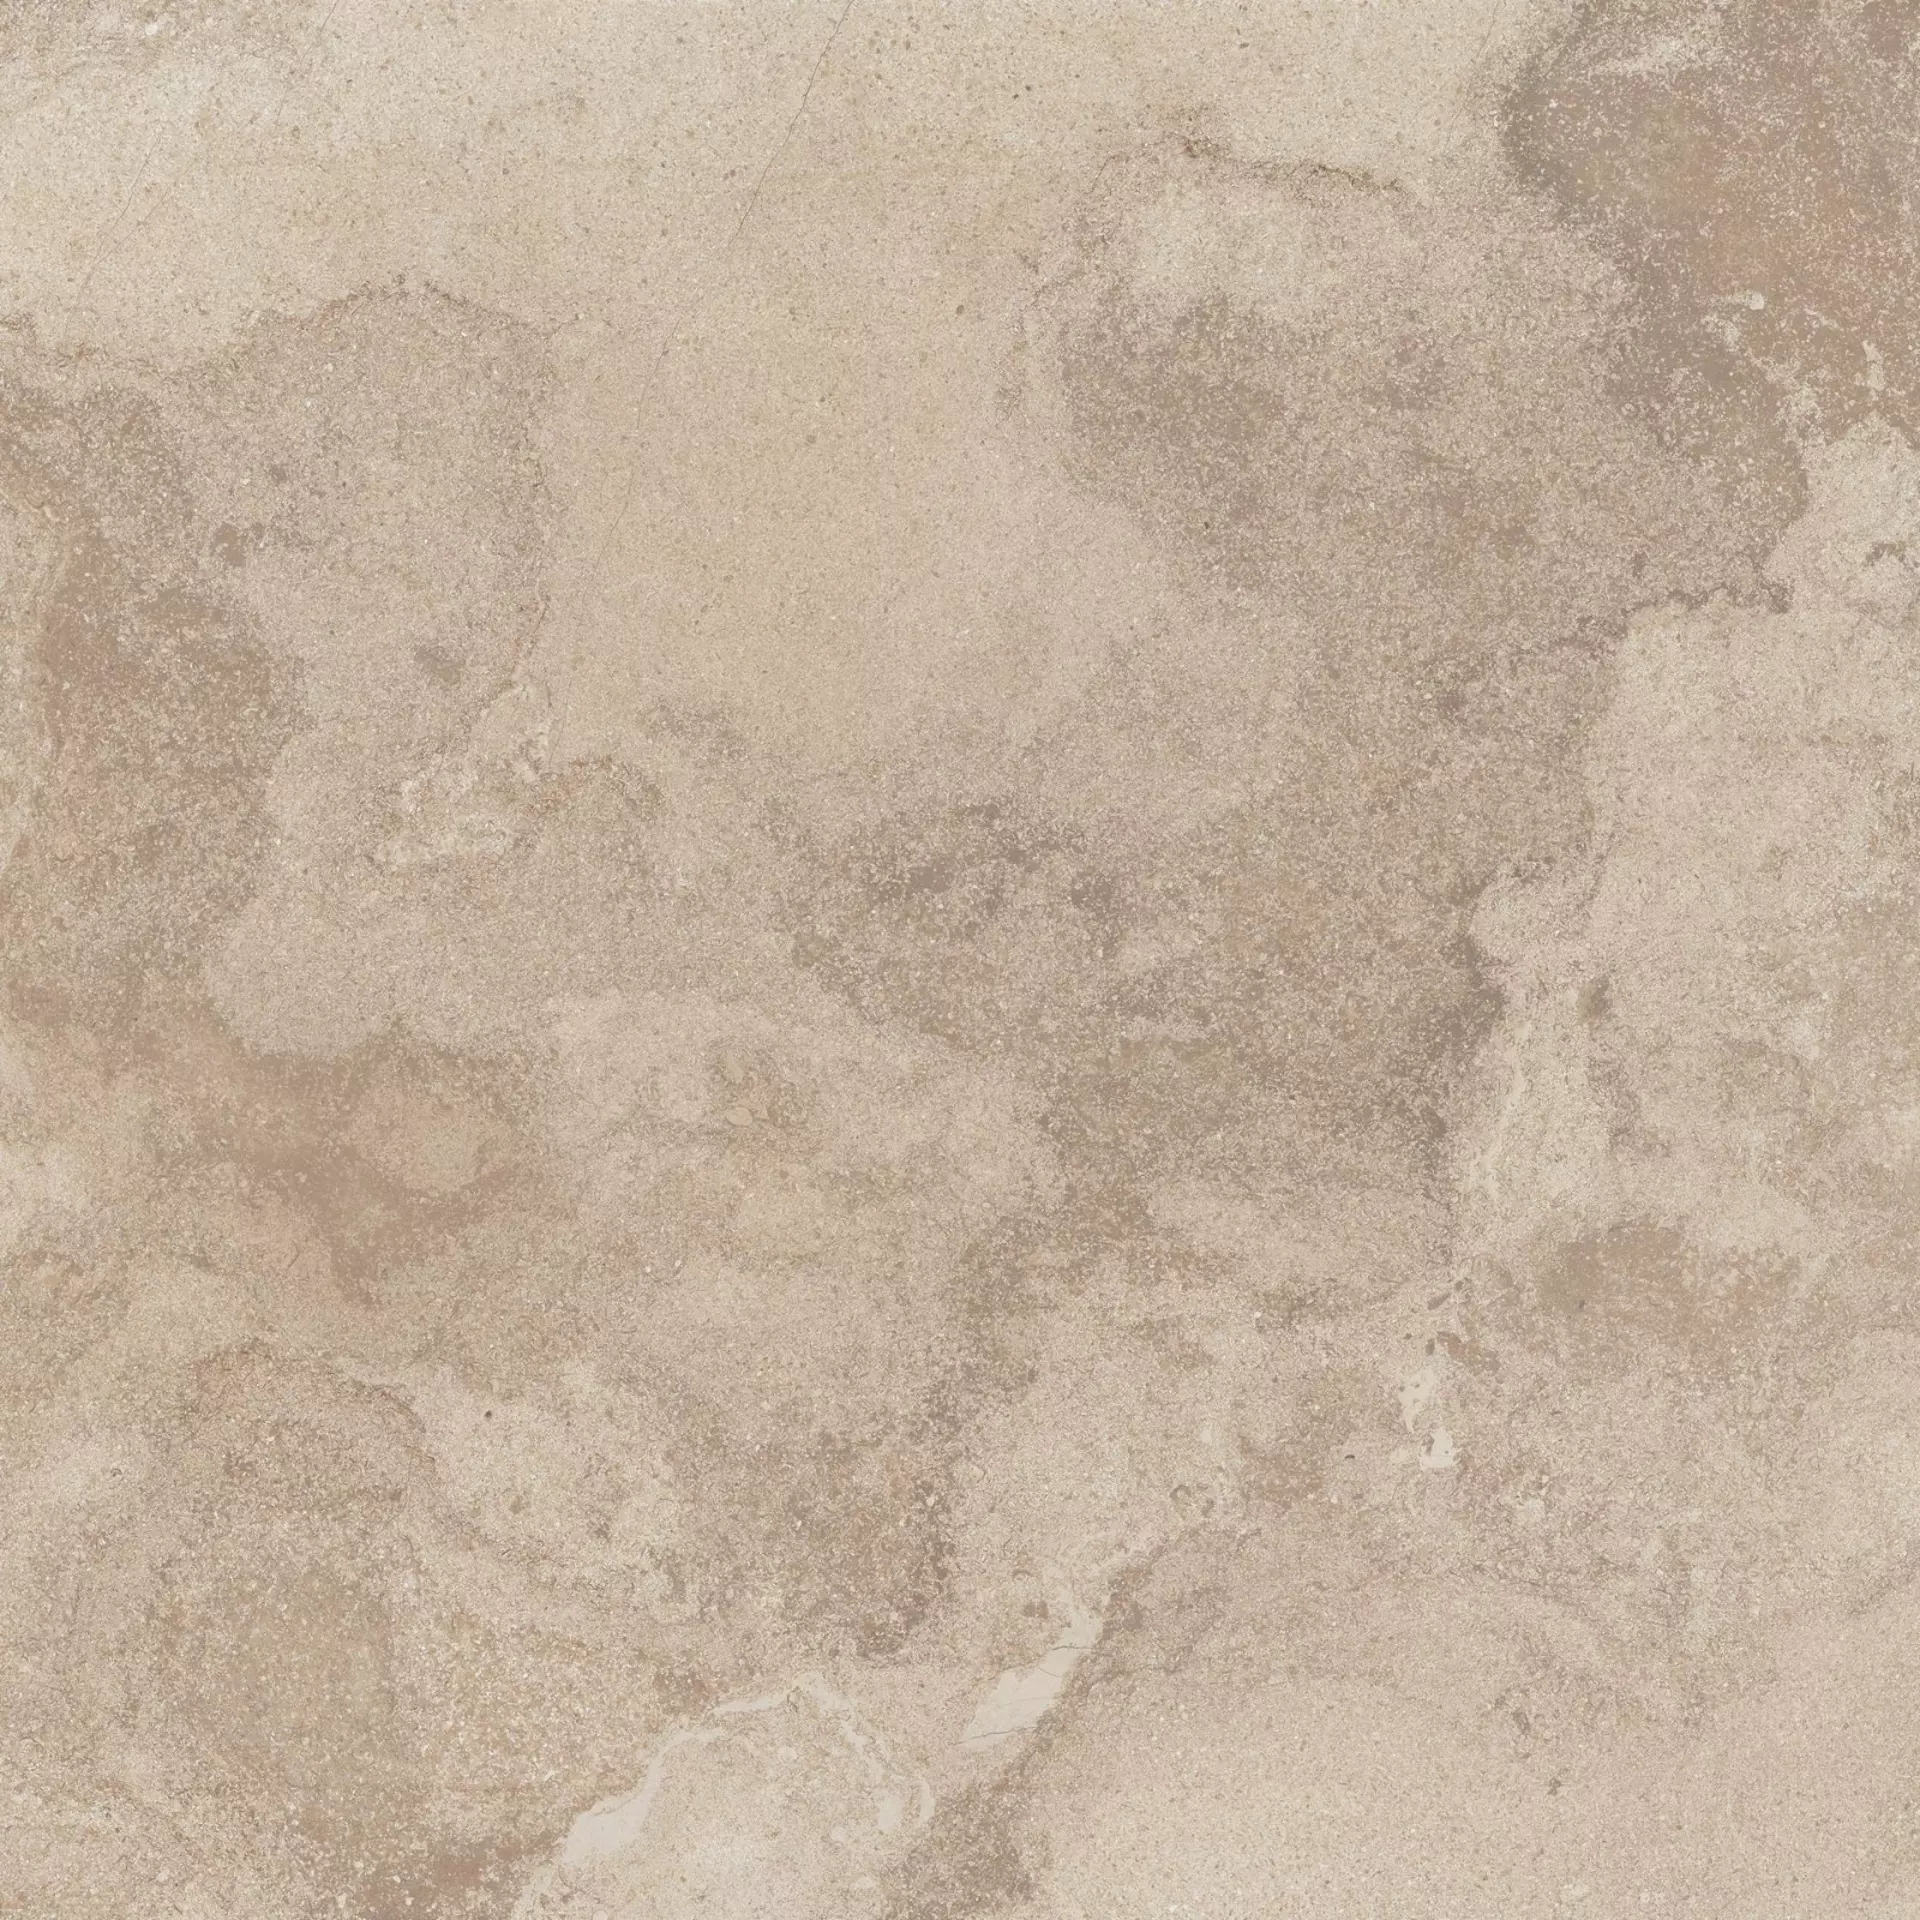 ABK Alpes Raw Sand Naturale PF60000019 60x60cm rectified 8,5mm